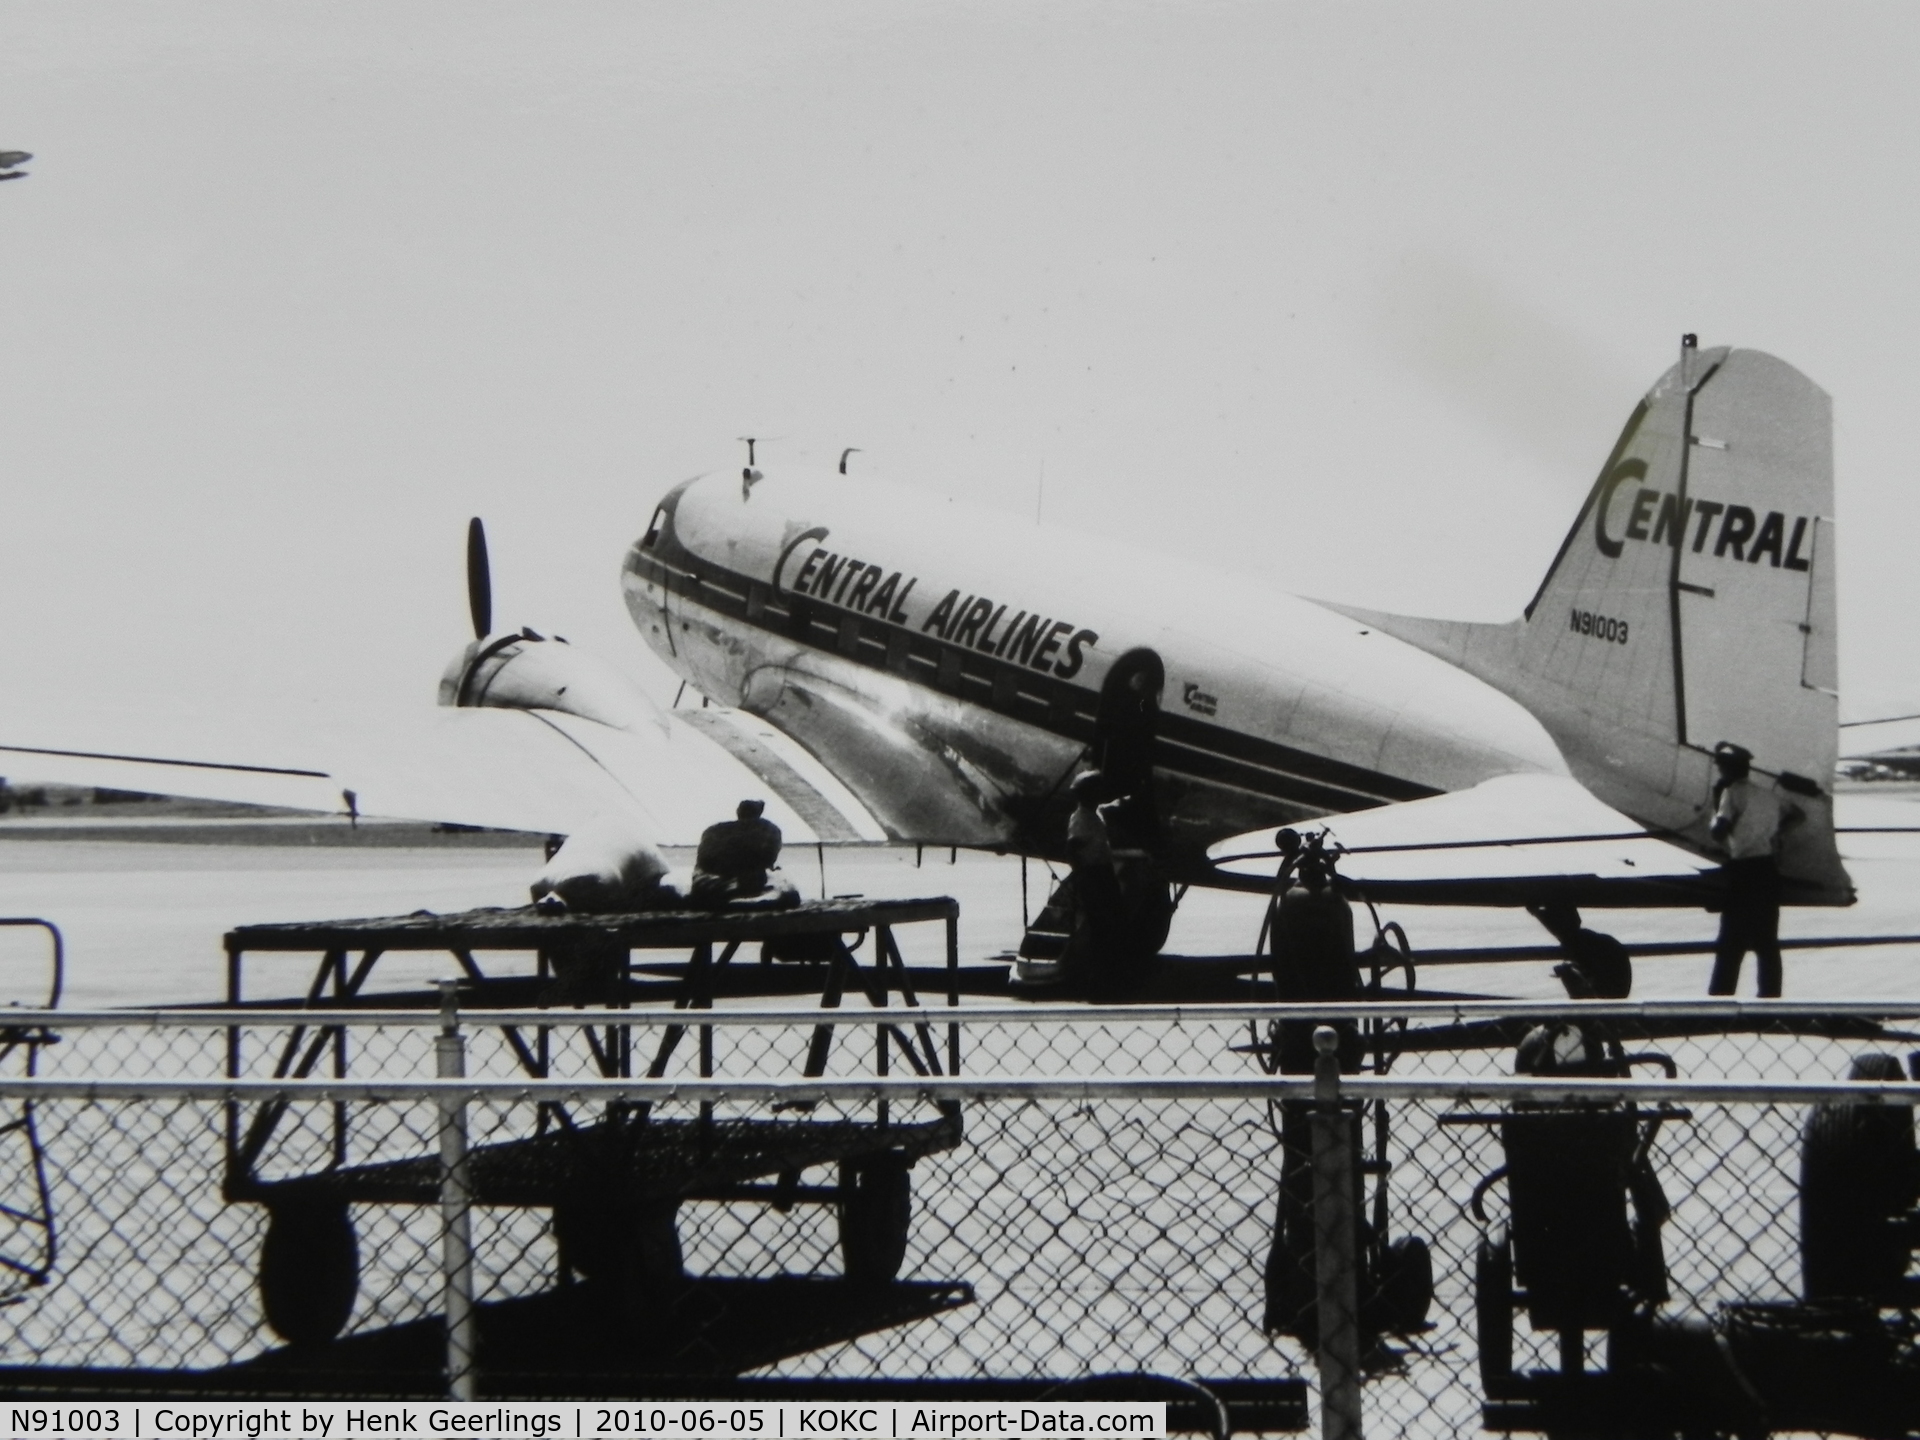 N91003, Douglas DC-3 C/N 9708, Central Airlines

Scan made from photo taken in 1959